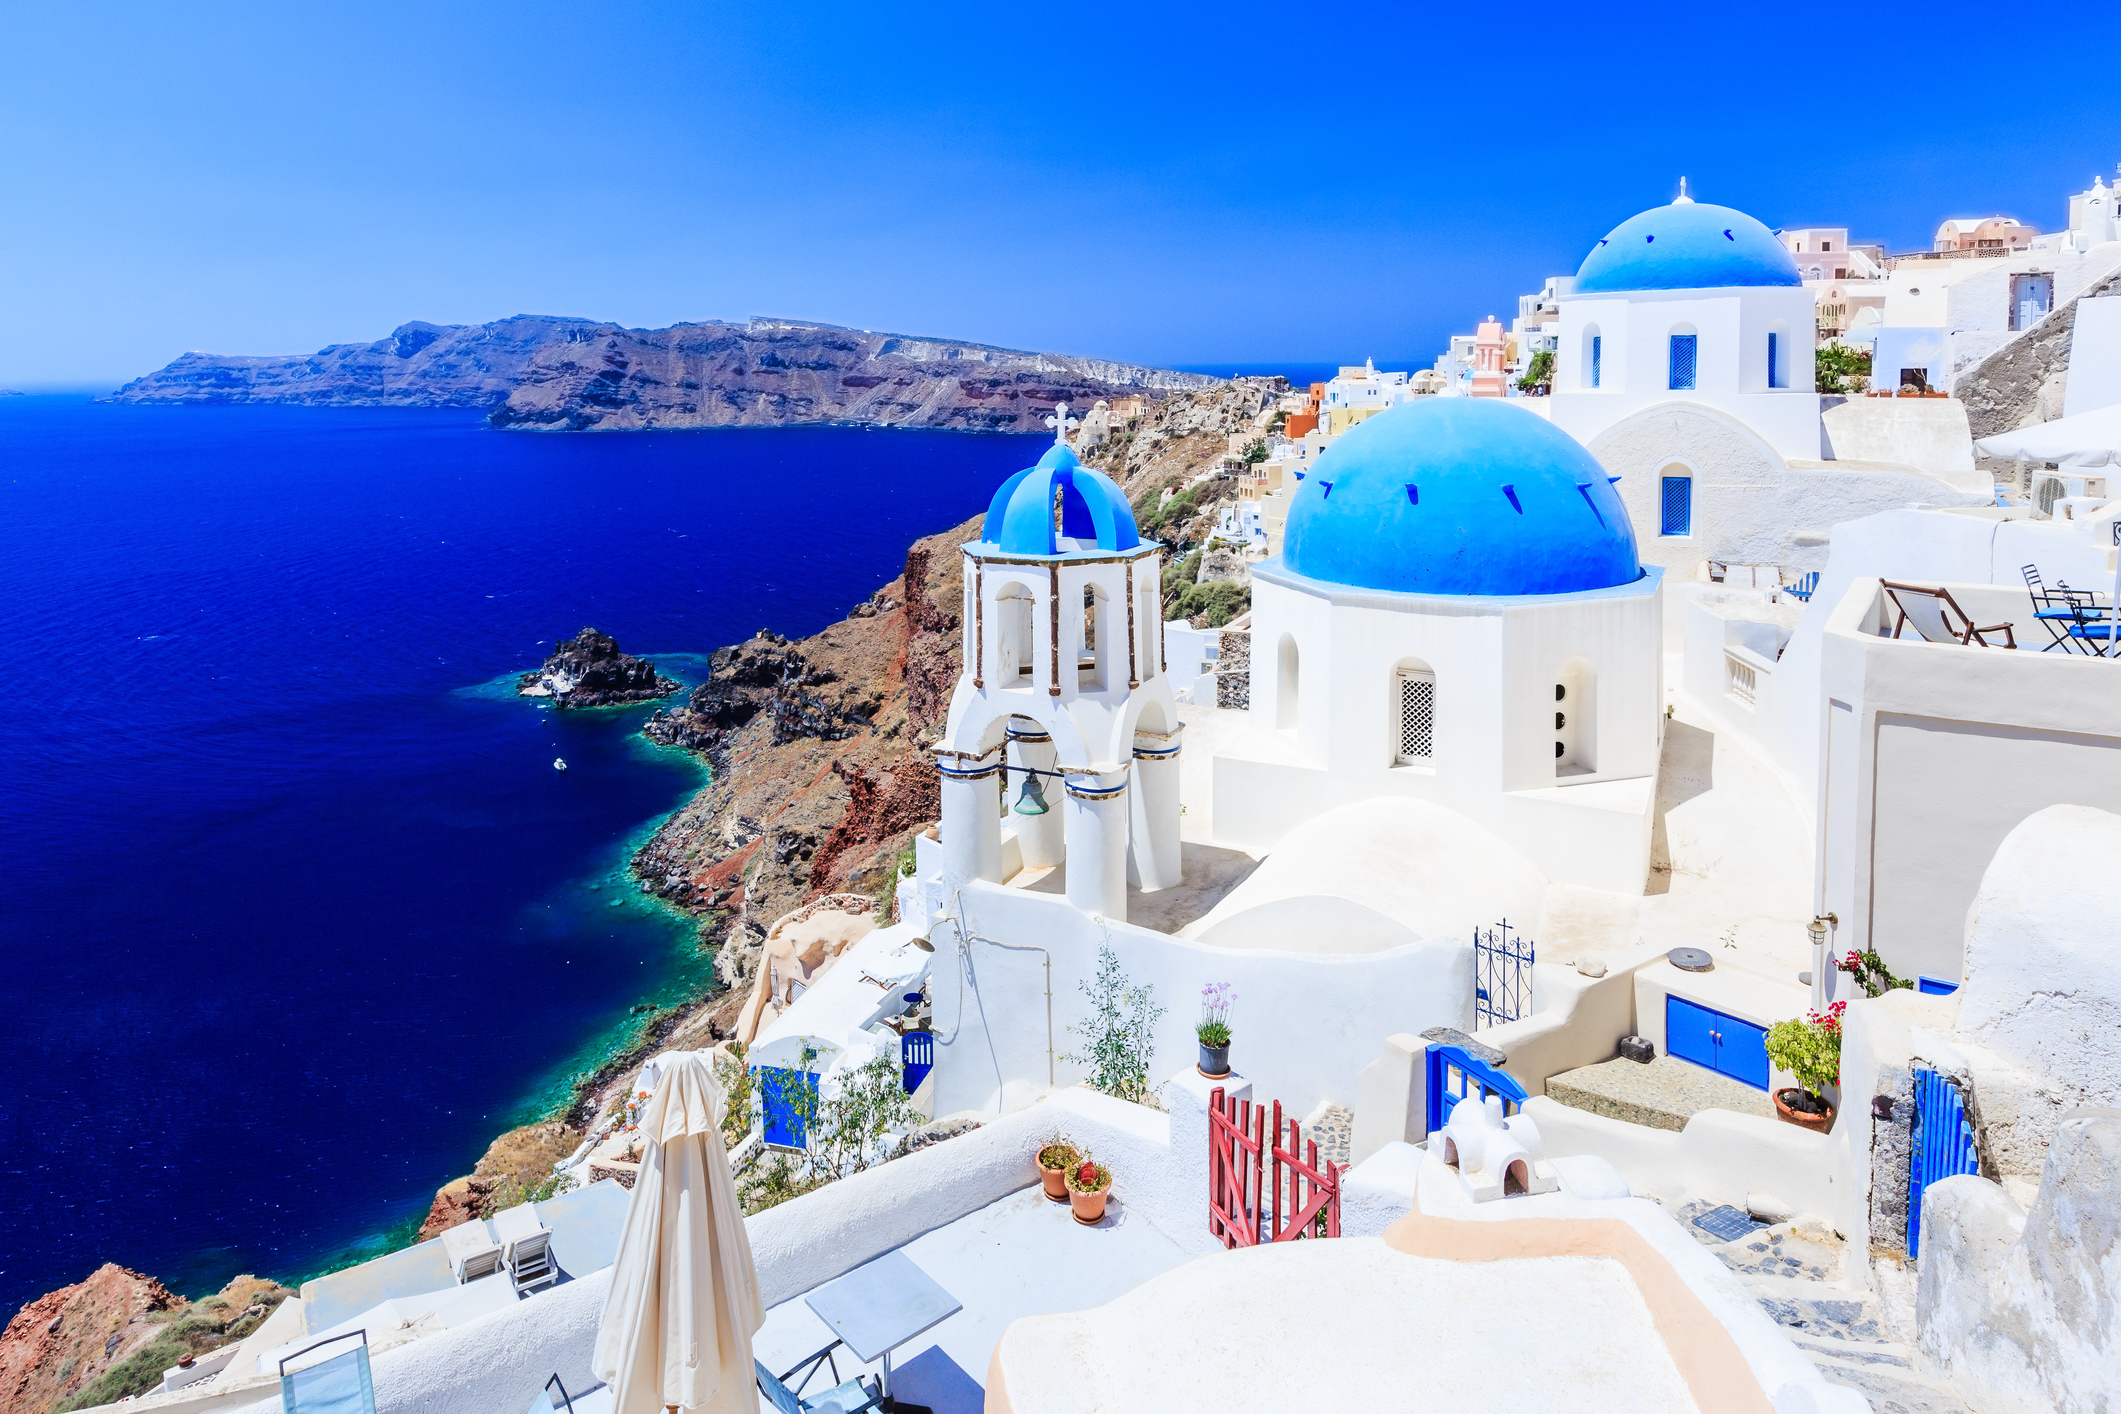 9-night Athens, Santorini & Istanbul trip with air from $1,531